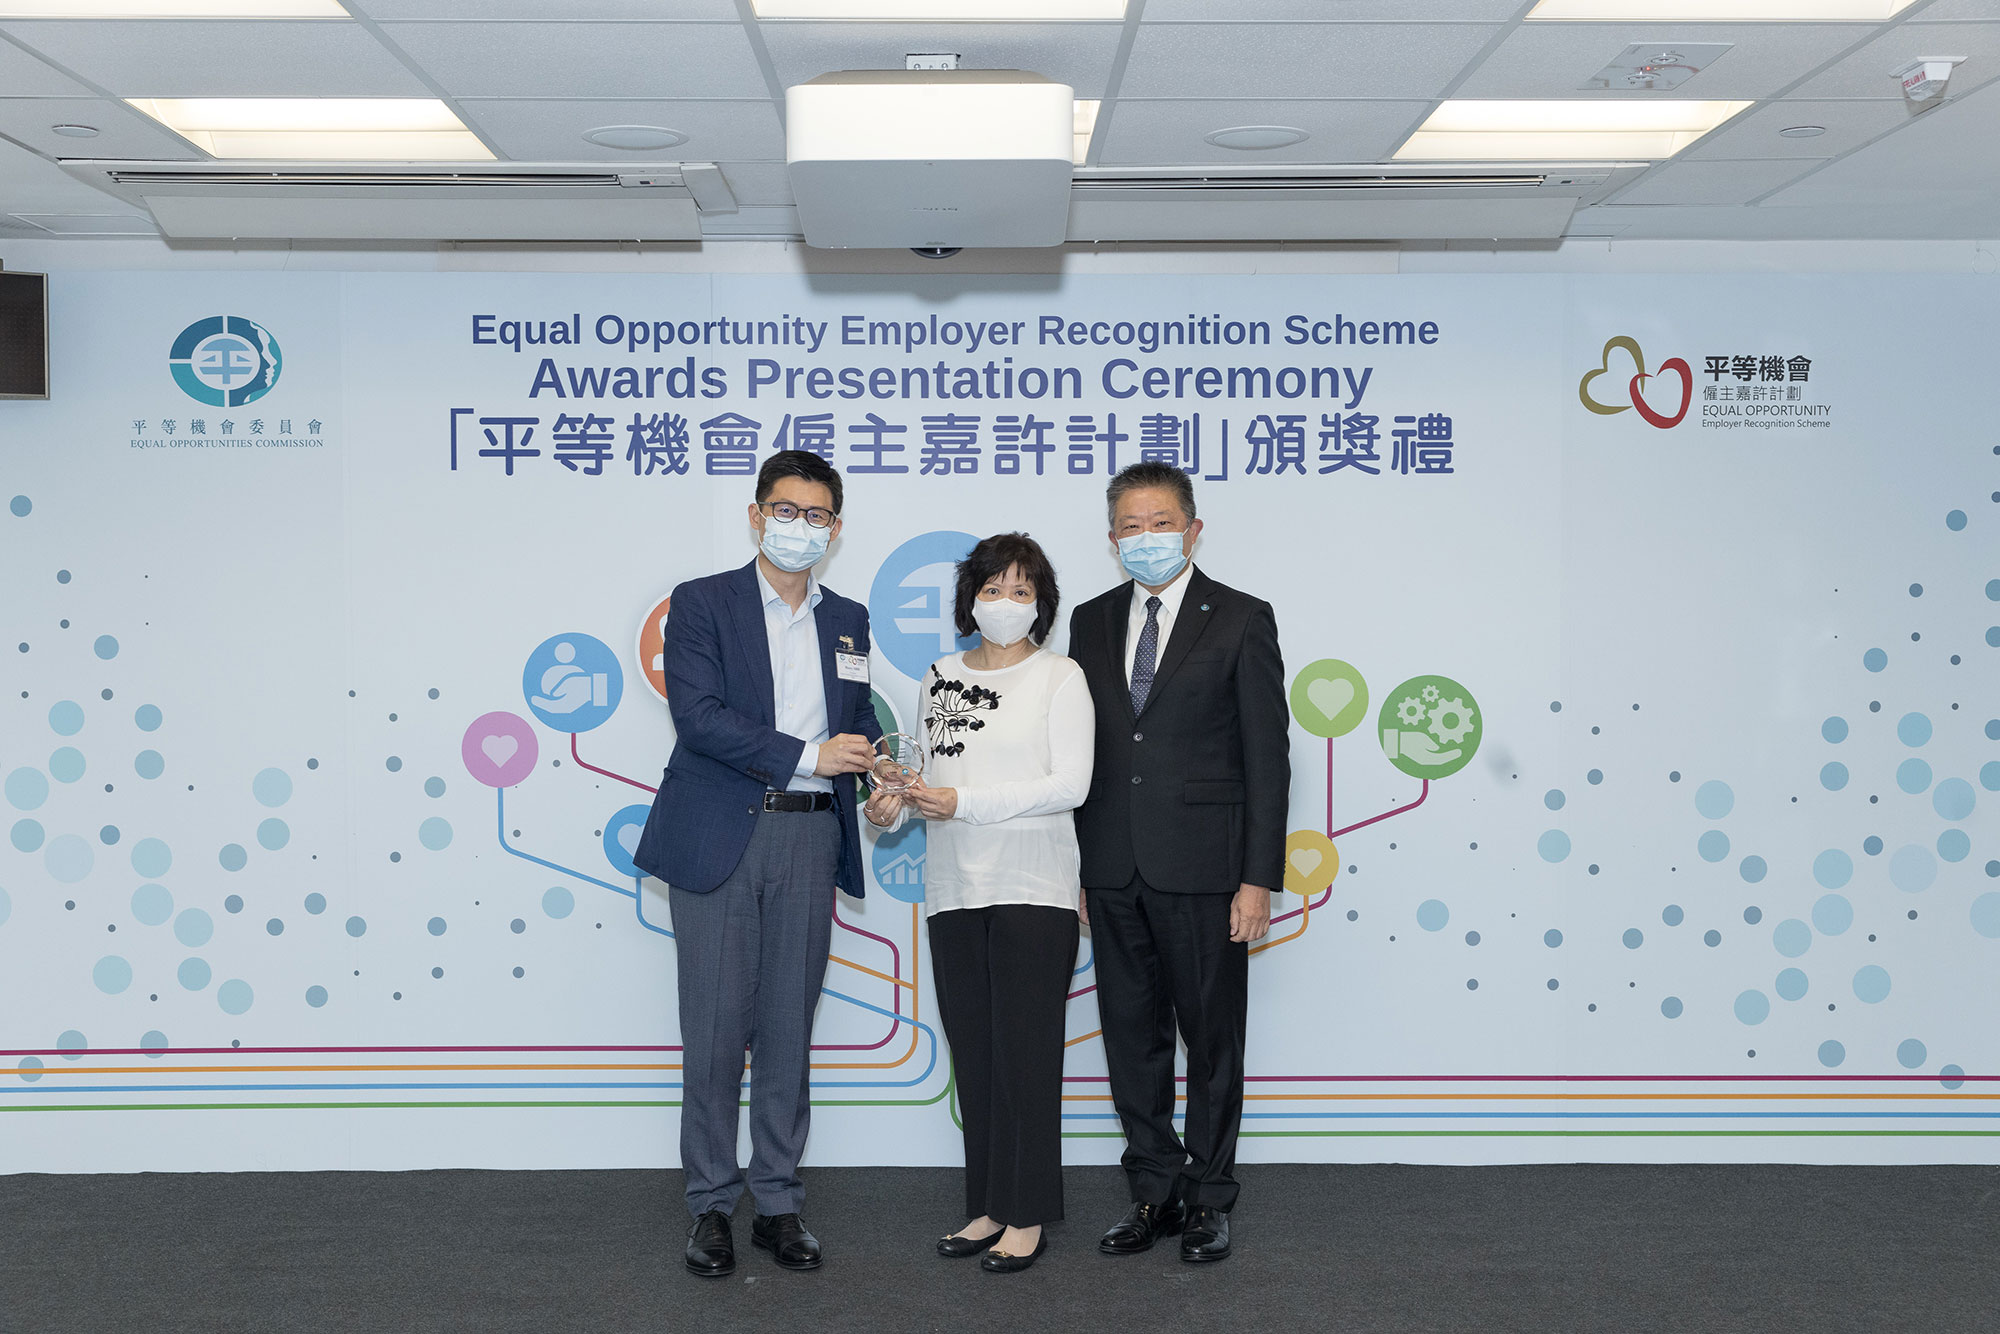 Mr Ricky CHU Man-kin, IDS, Chairperson of the Equal Opportunities Commission (right) and Dr Henry SHIE, EOC Member and Convenor of the Administration and Finance Committee (left), present the trophy to the representative of Carthy Limited (centre), winner of the Outstanding SME Award of the Equal Opportunity Employer Recognition Scheme. 